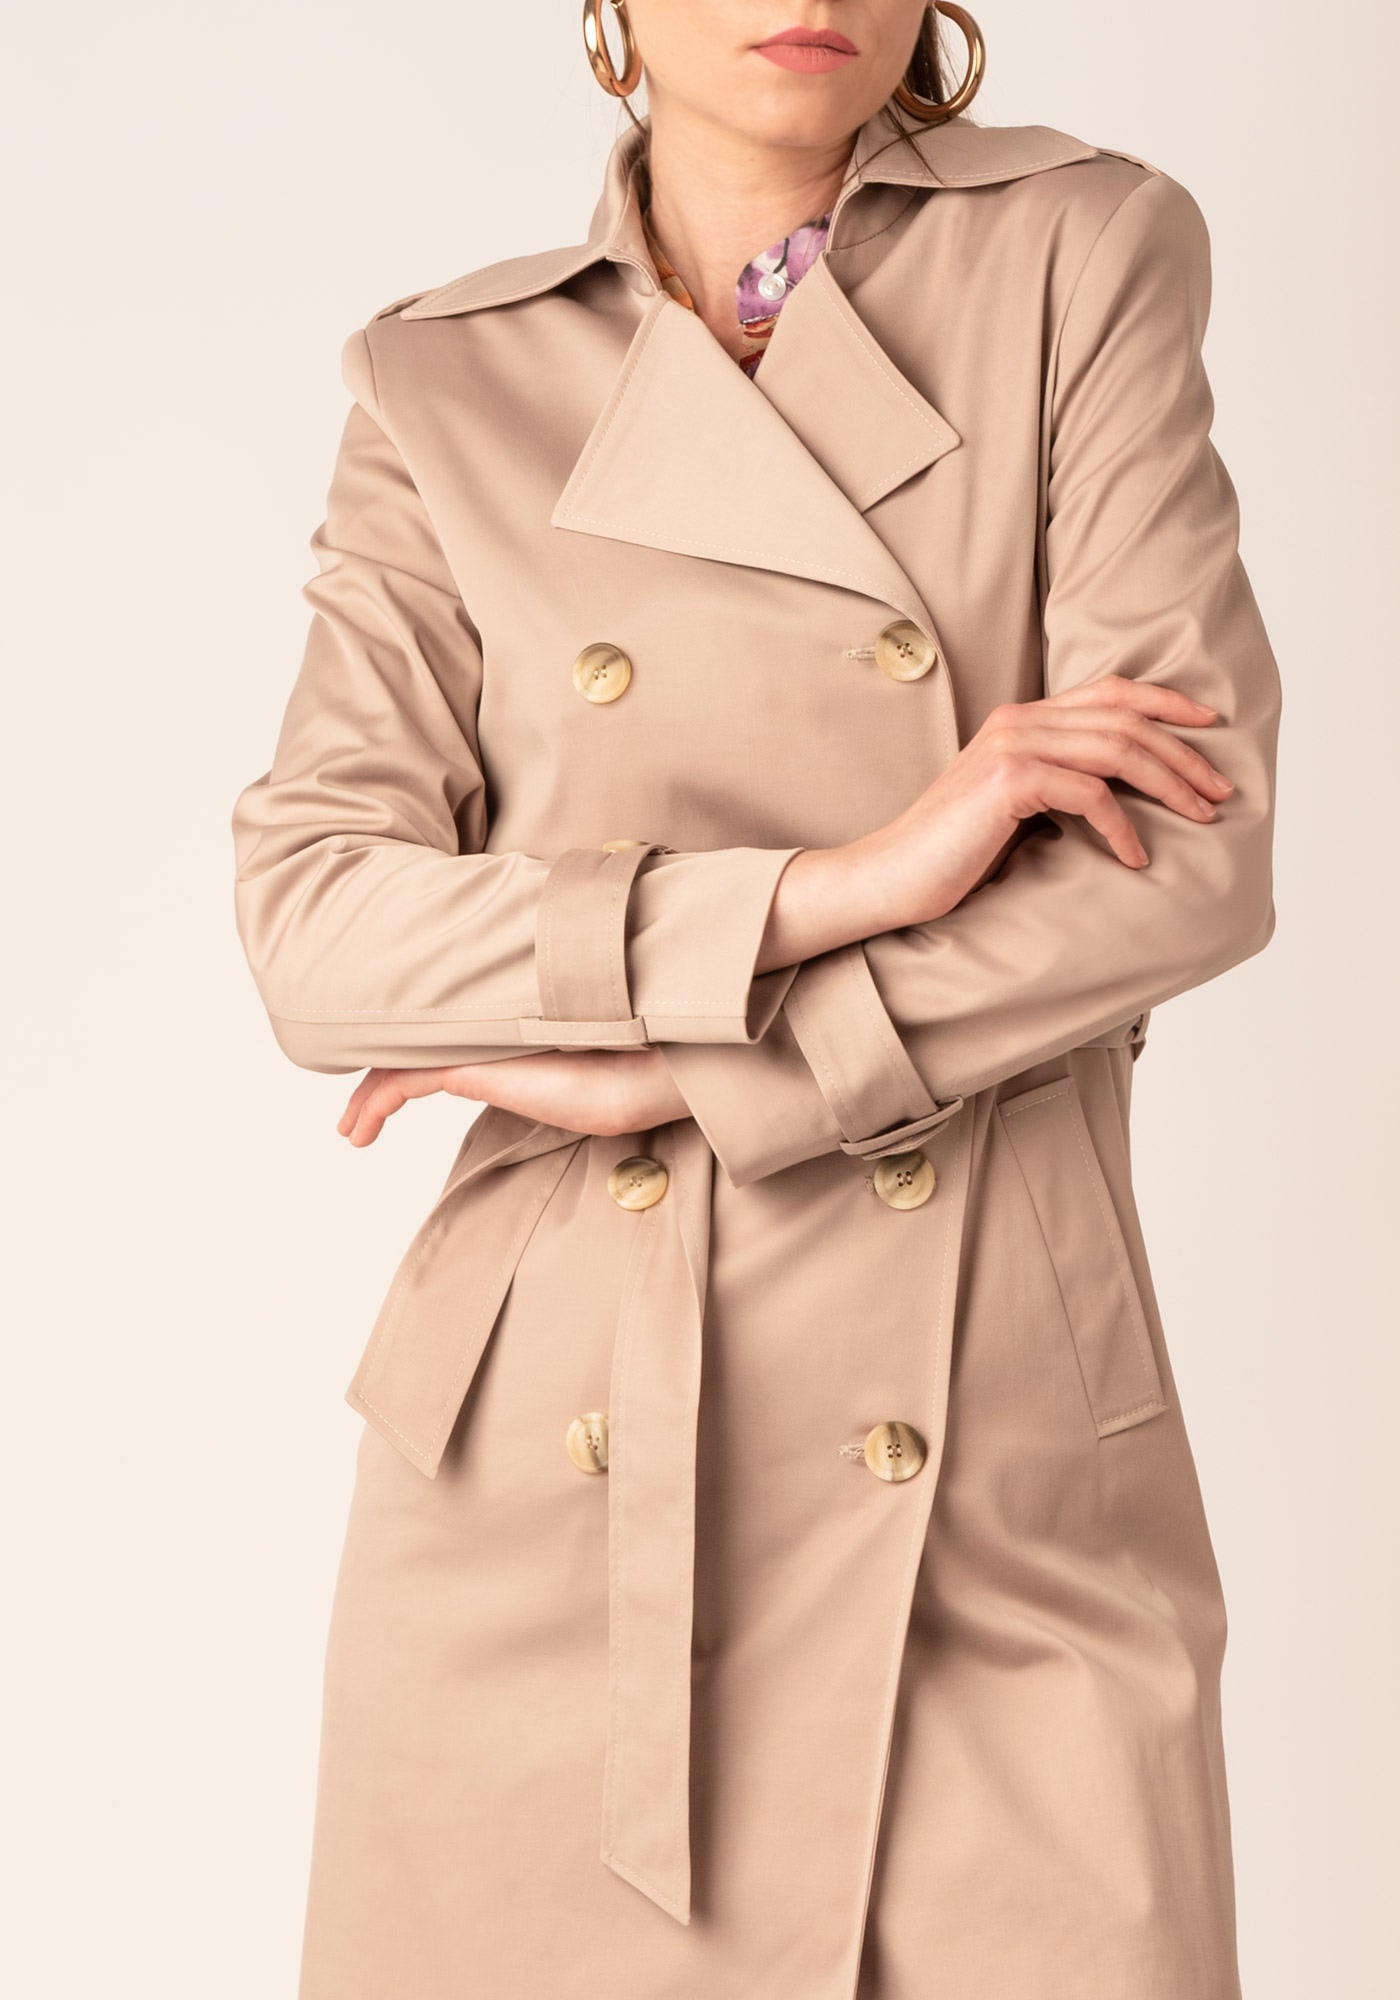 Women's Tailored Double breasted Trench coat in Beige